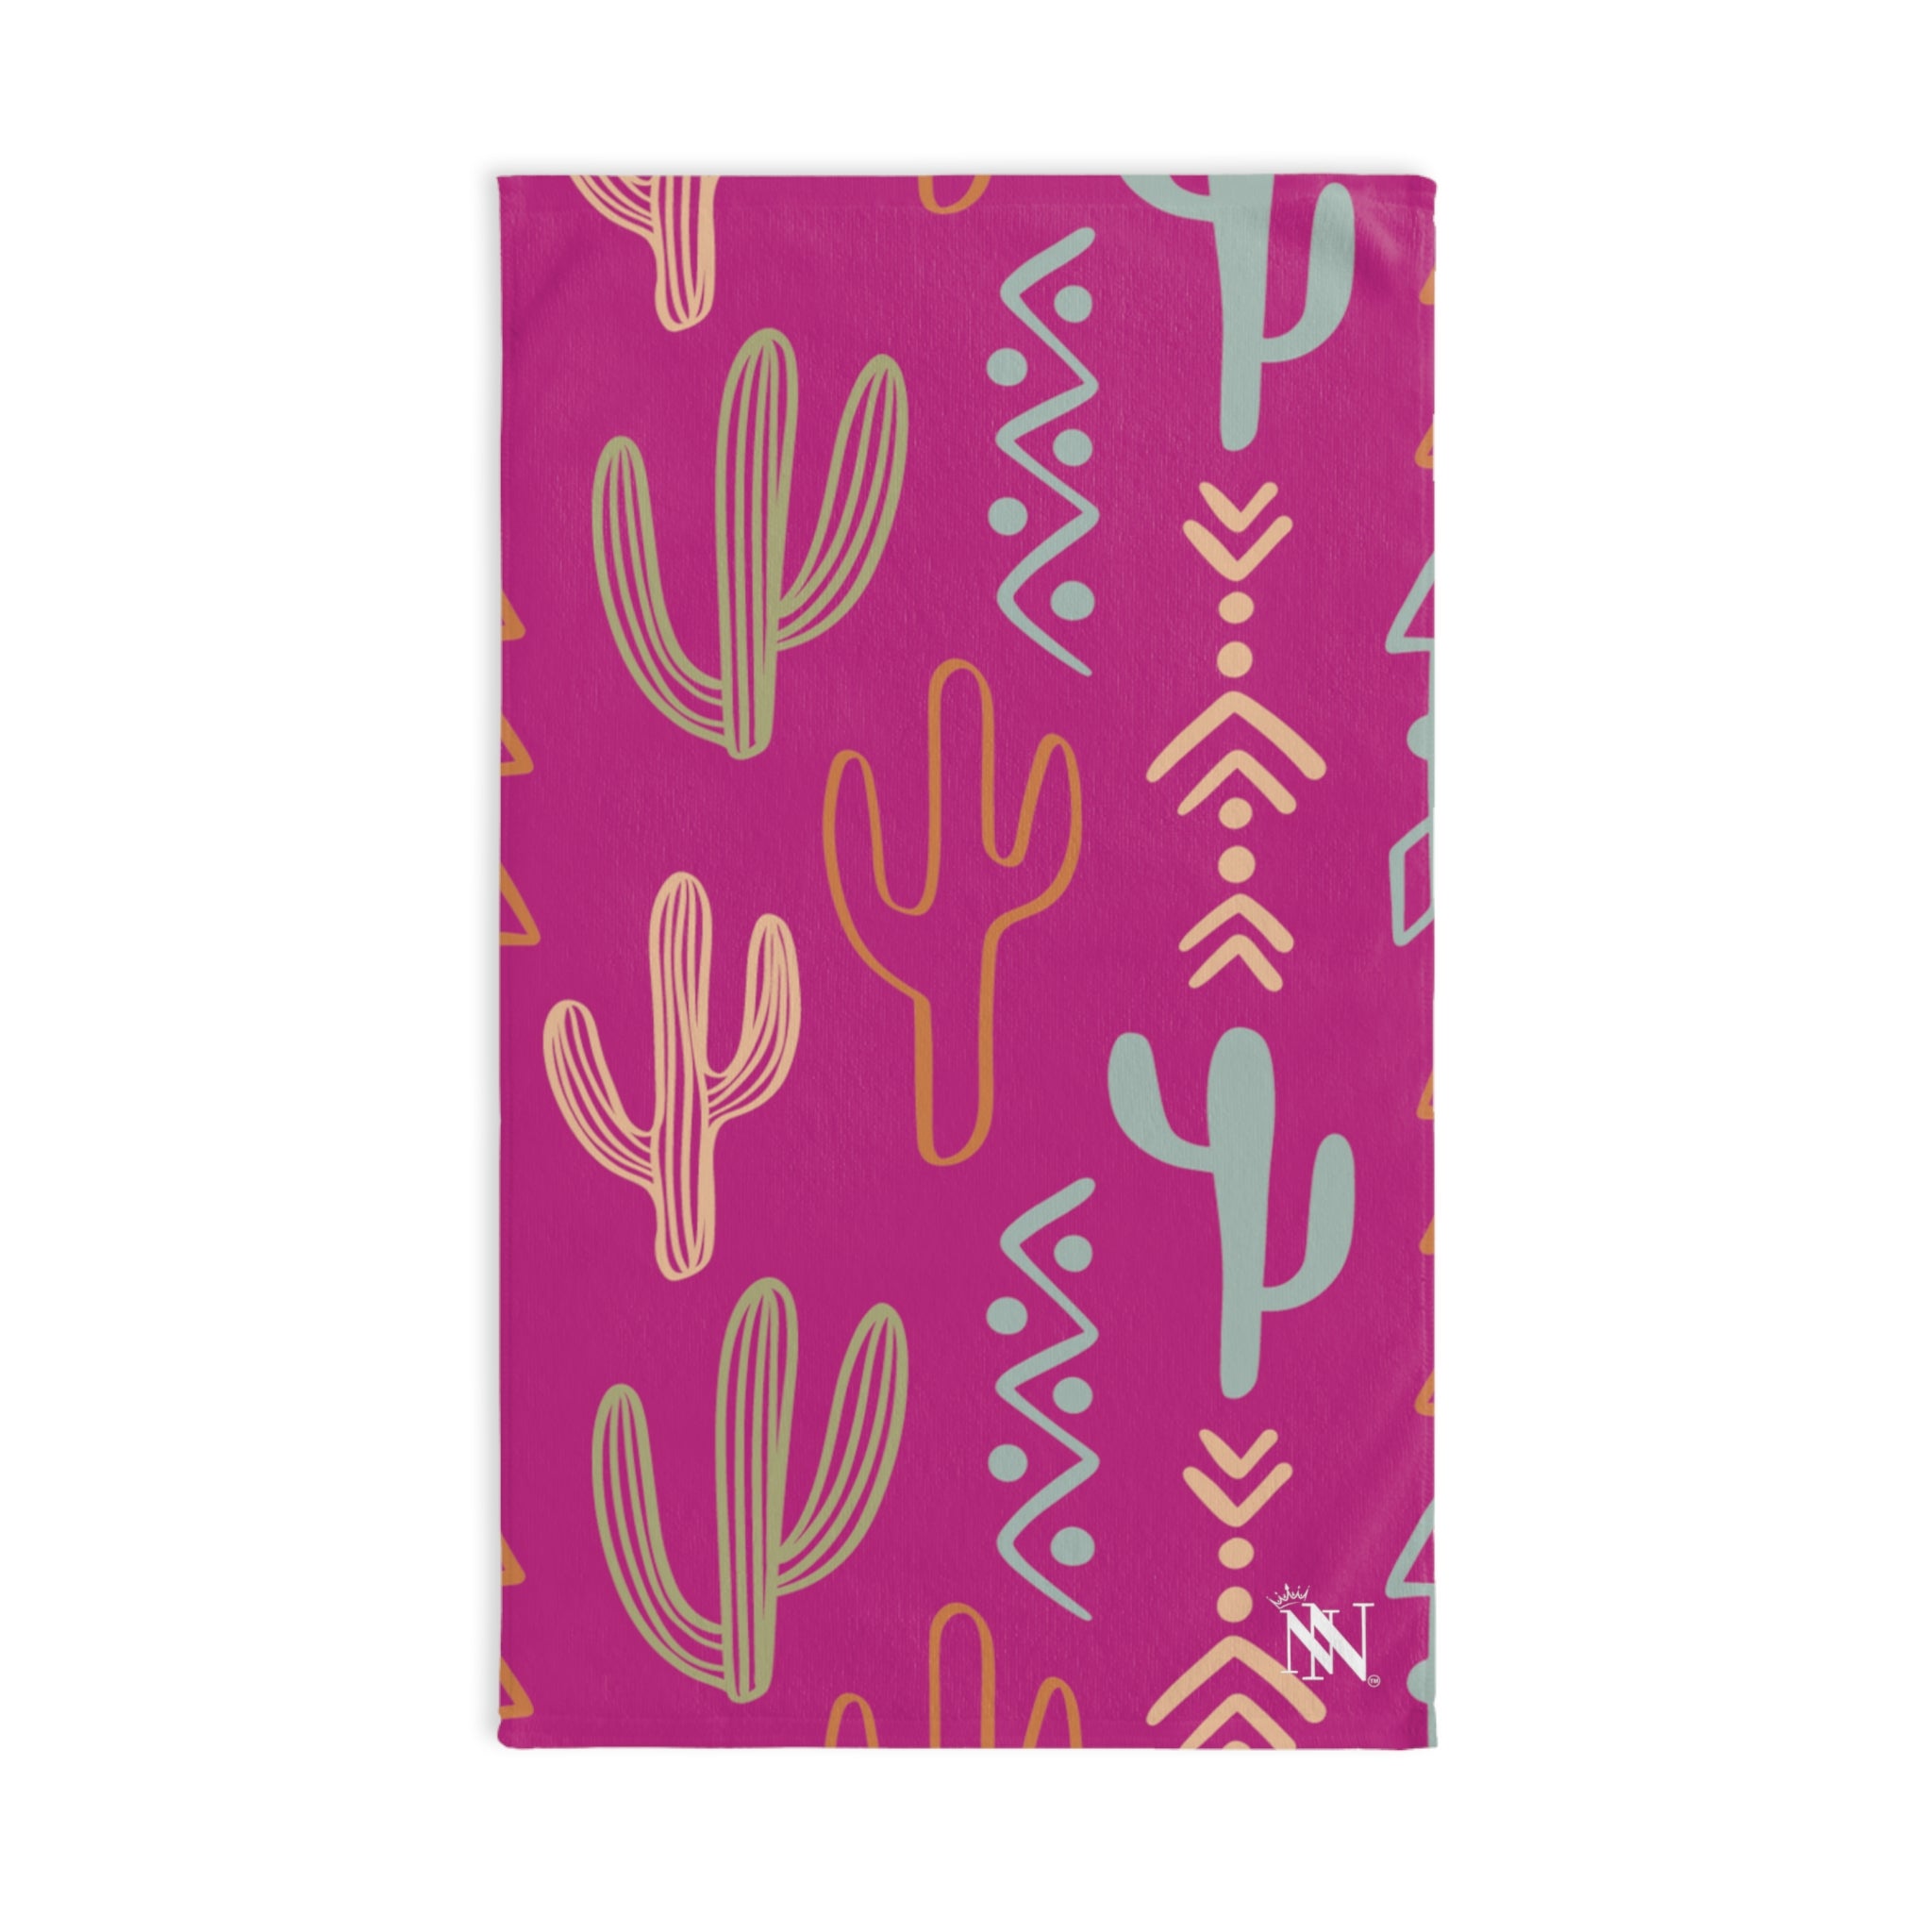 Cactus Western Fuscia | Funny Gifts for Men - Gifts for Him - Birthday Gifts for Men, Him, Husband, Boyfriend, New Couple Gifts, Fathers & Valentines Day Gifts, Hand Towels NECTAR NAPKINS